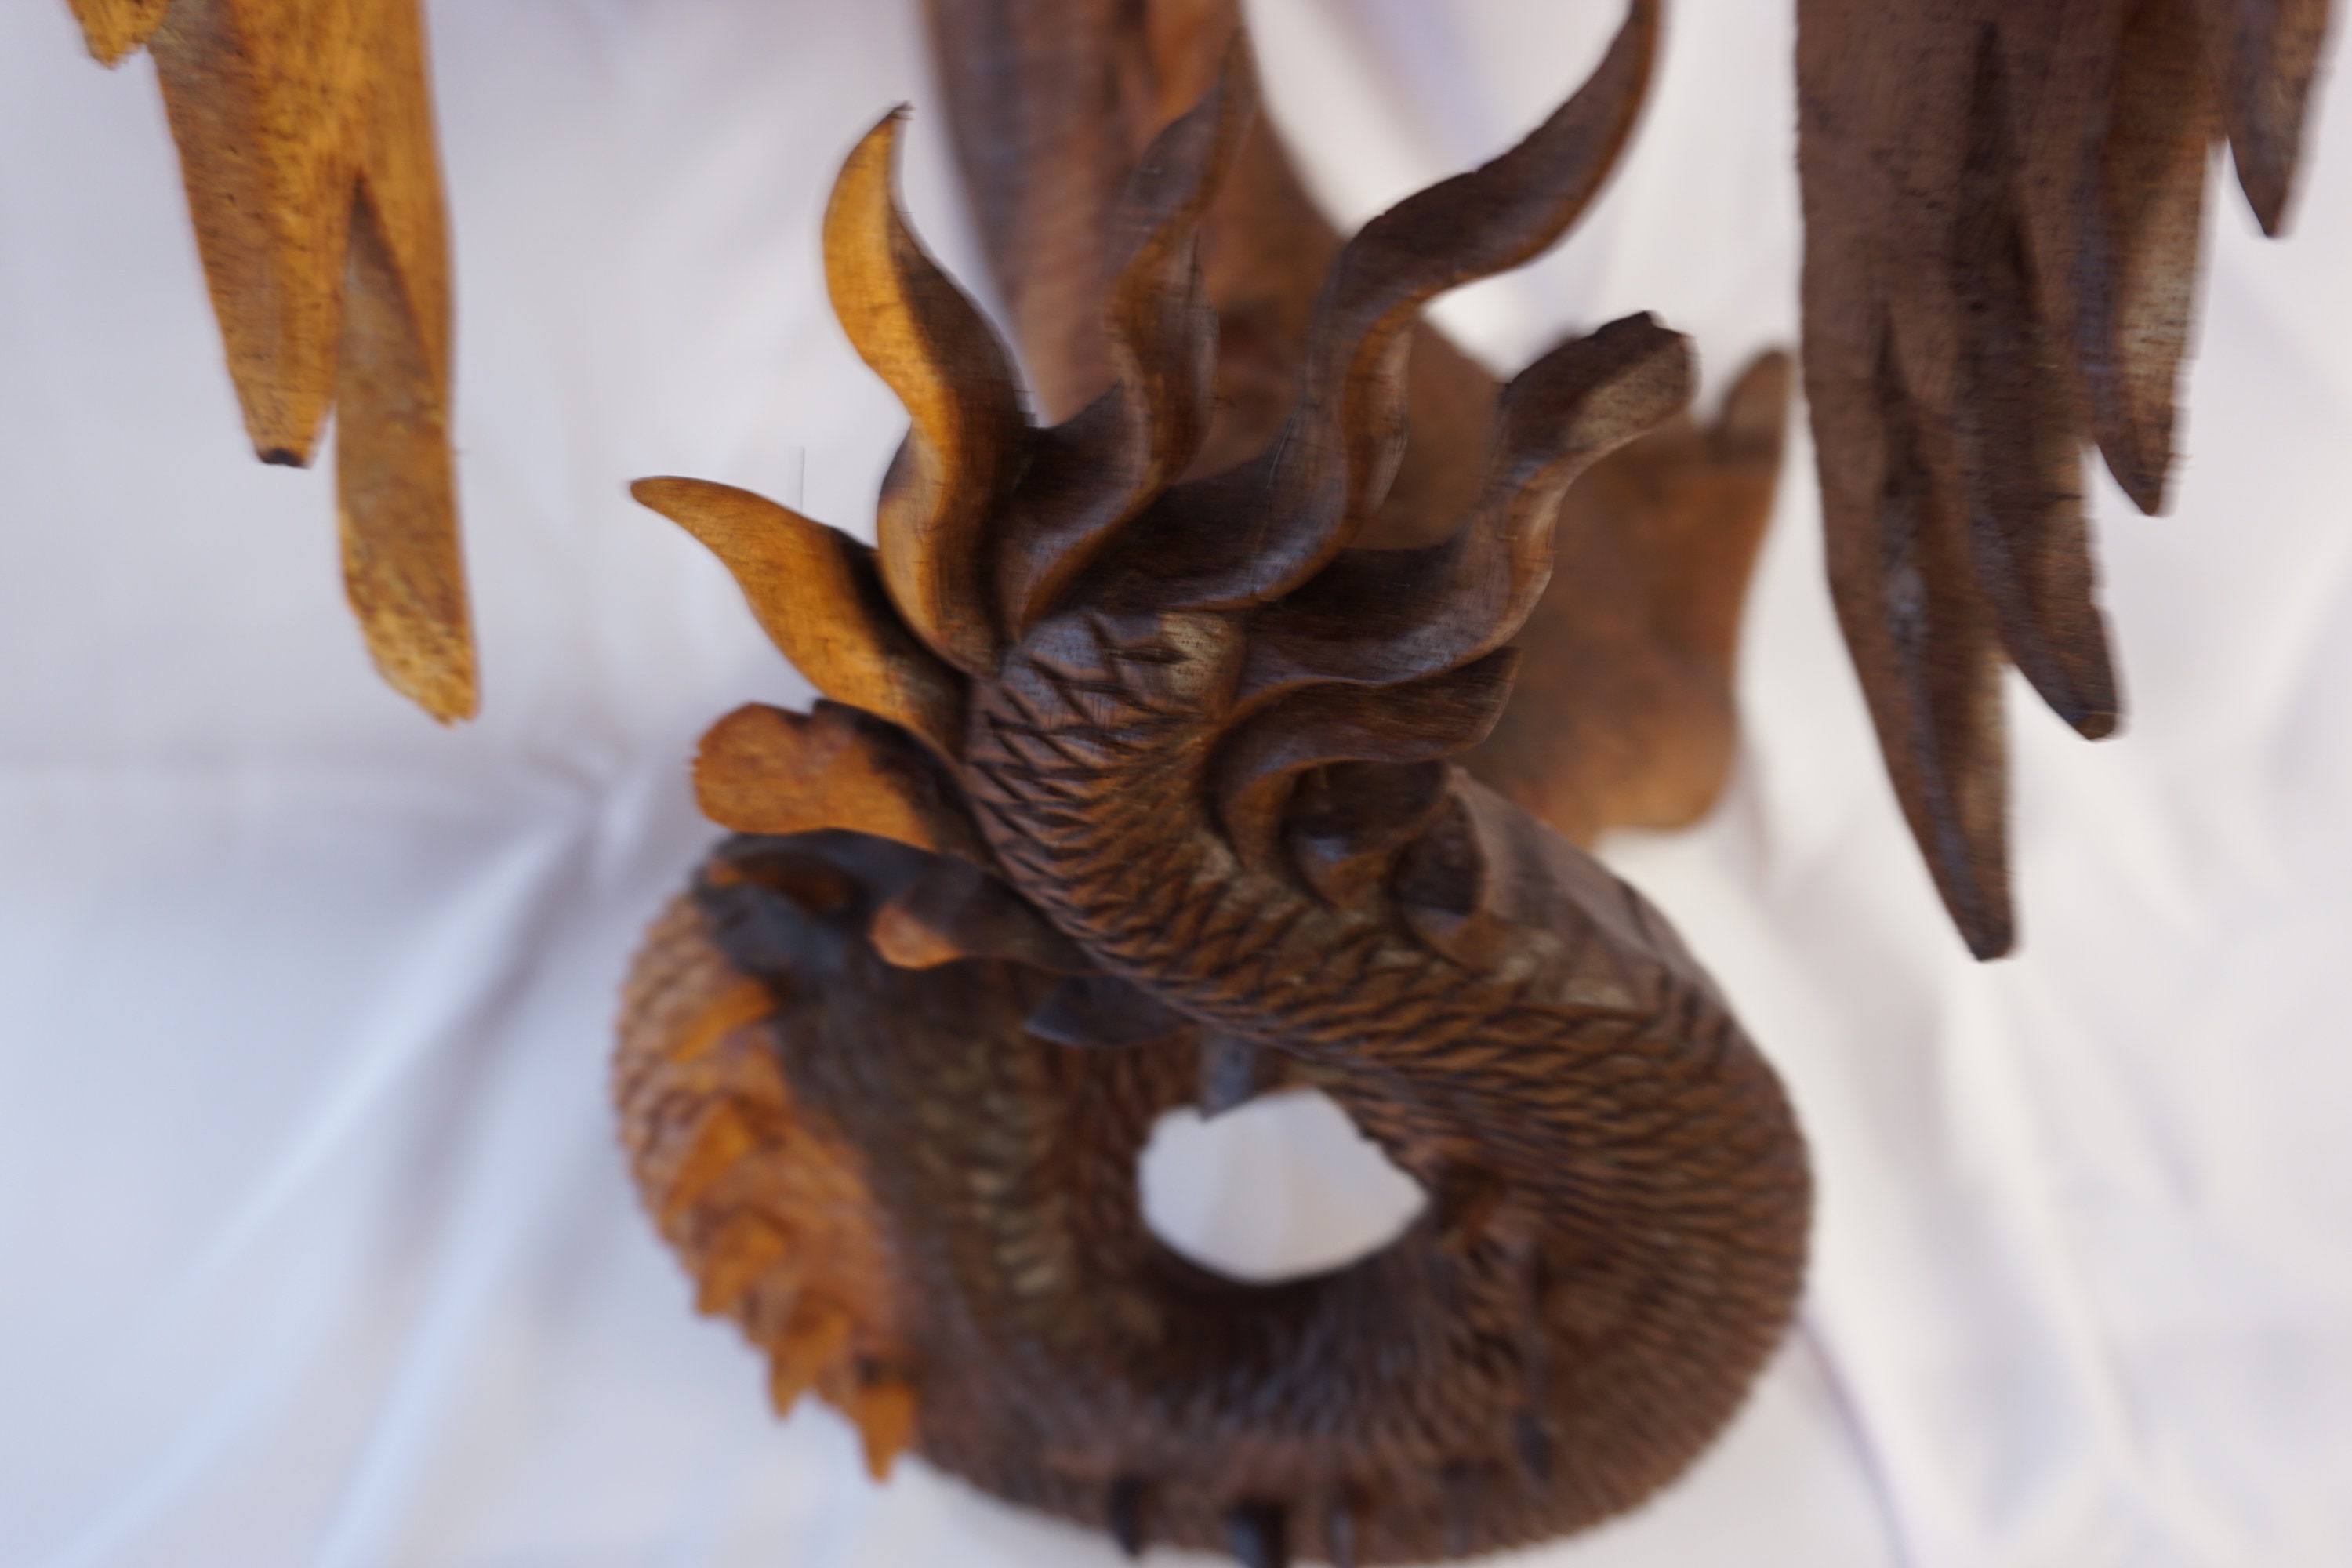 Hand Carved Wood Dragon Sculpture 'Winged Dragon' - Road Scholar